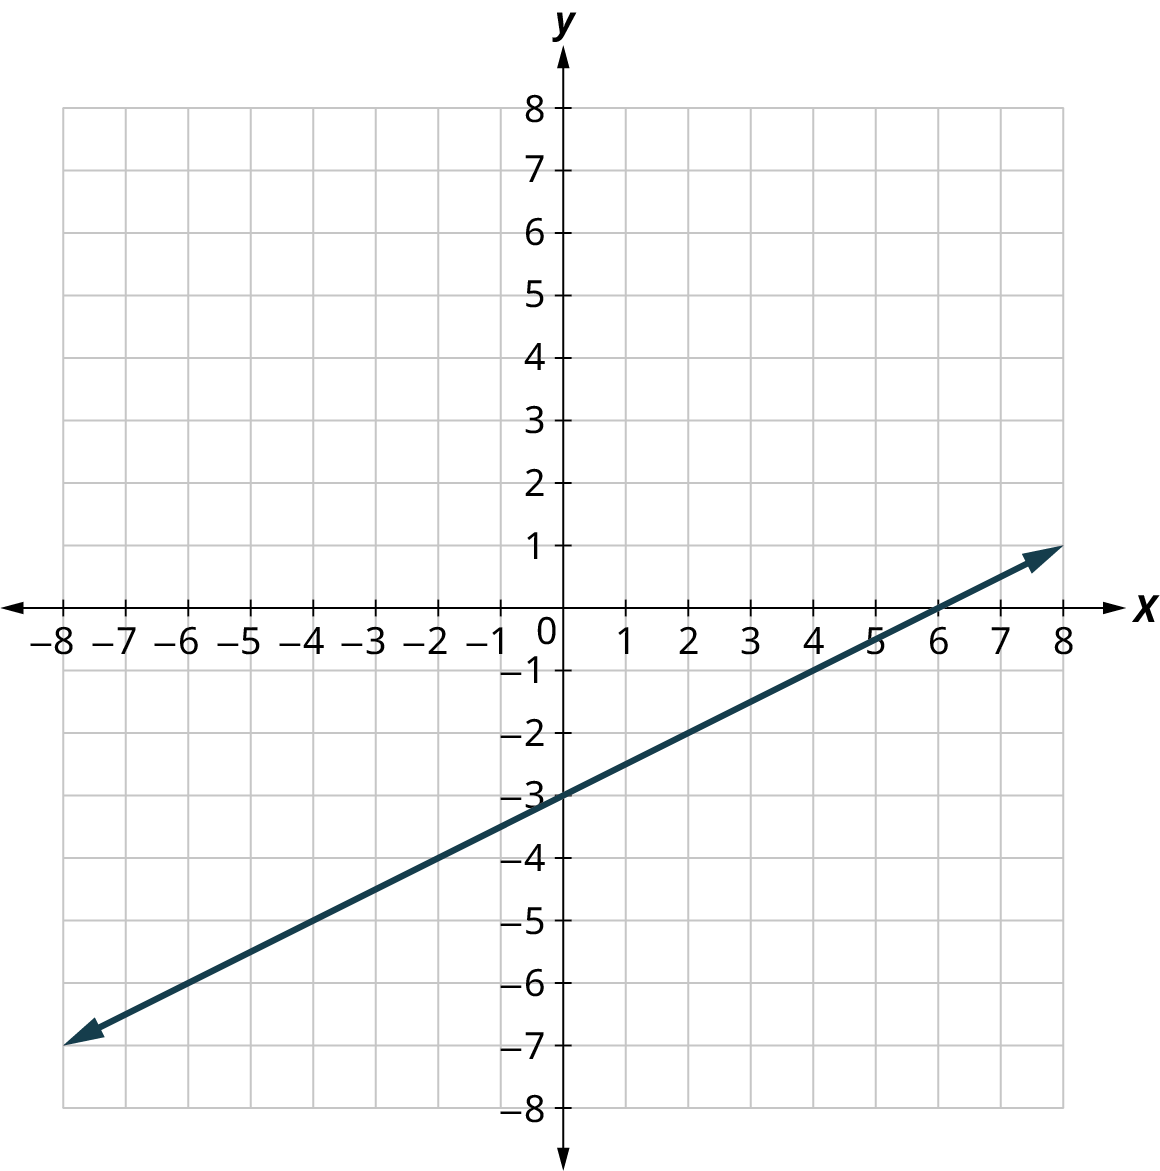 A line is plotted on an x y coordinate plane. The x and y axes range from negative 8 to 8, in increments of 1. The line passes through the points, (negative 6, negative 6), (0, negative 3), and (6, 0).